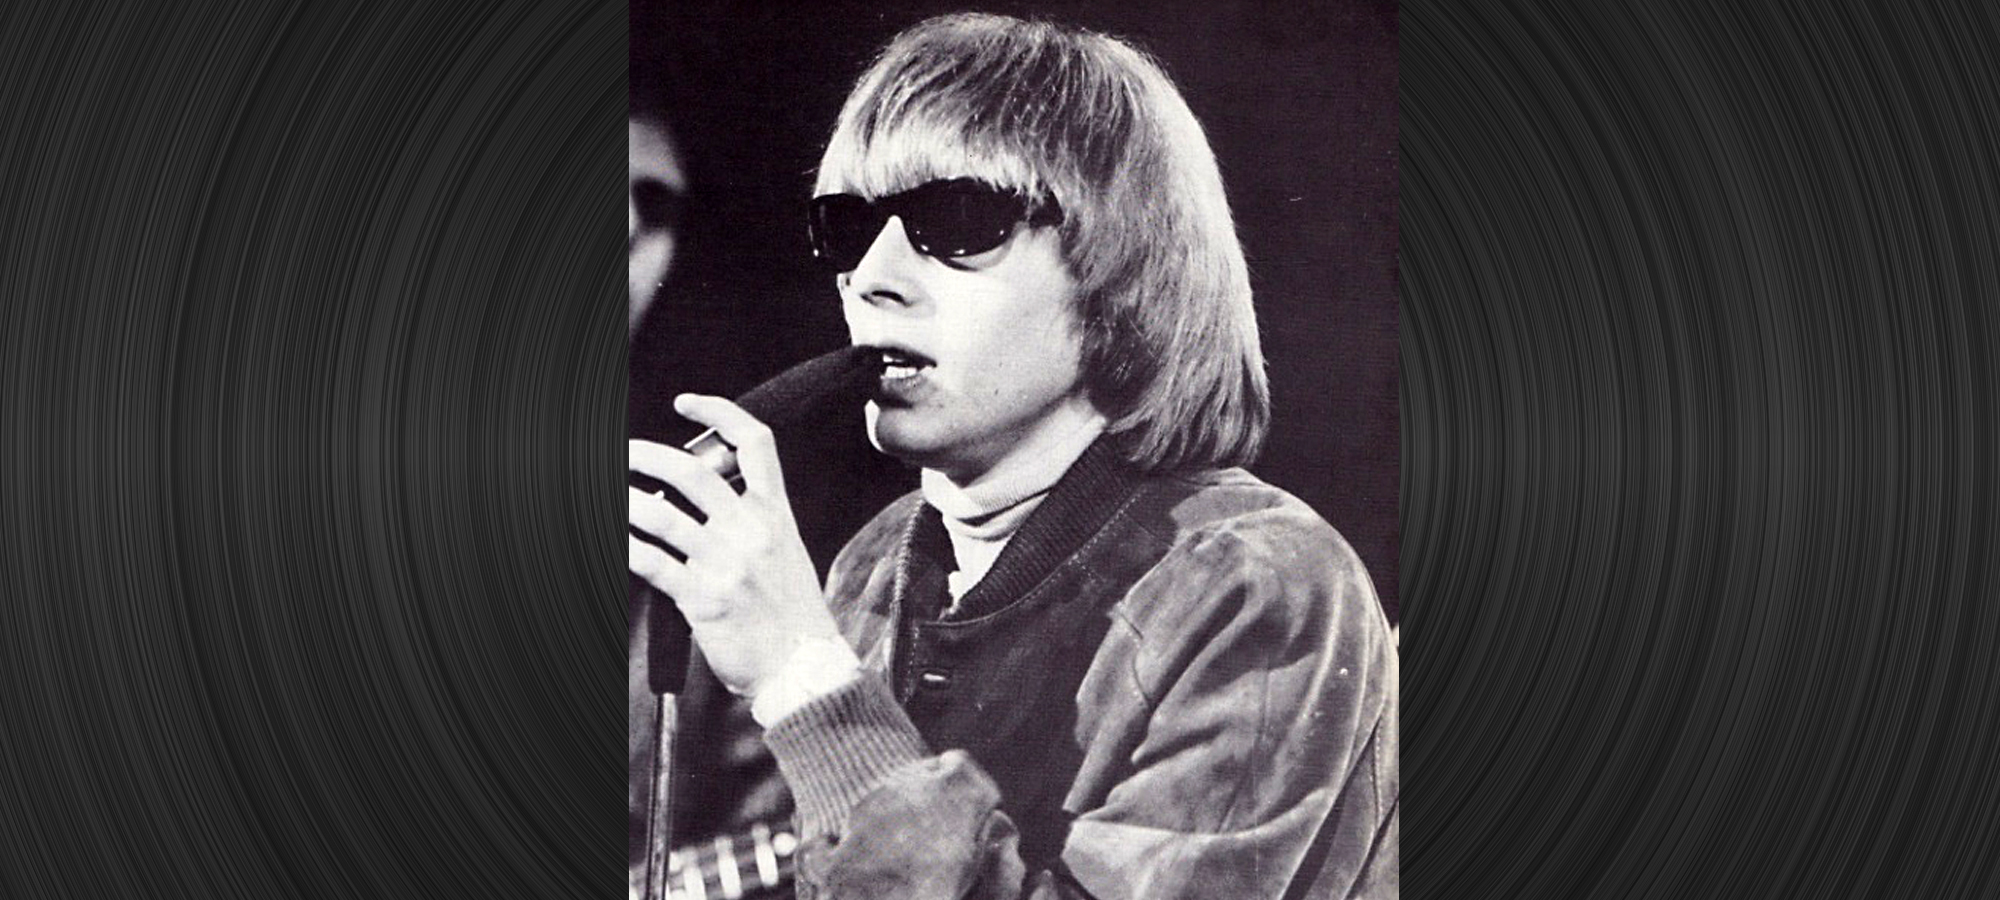 Keith Relf Image